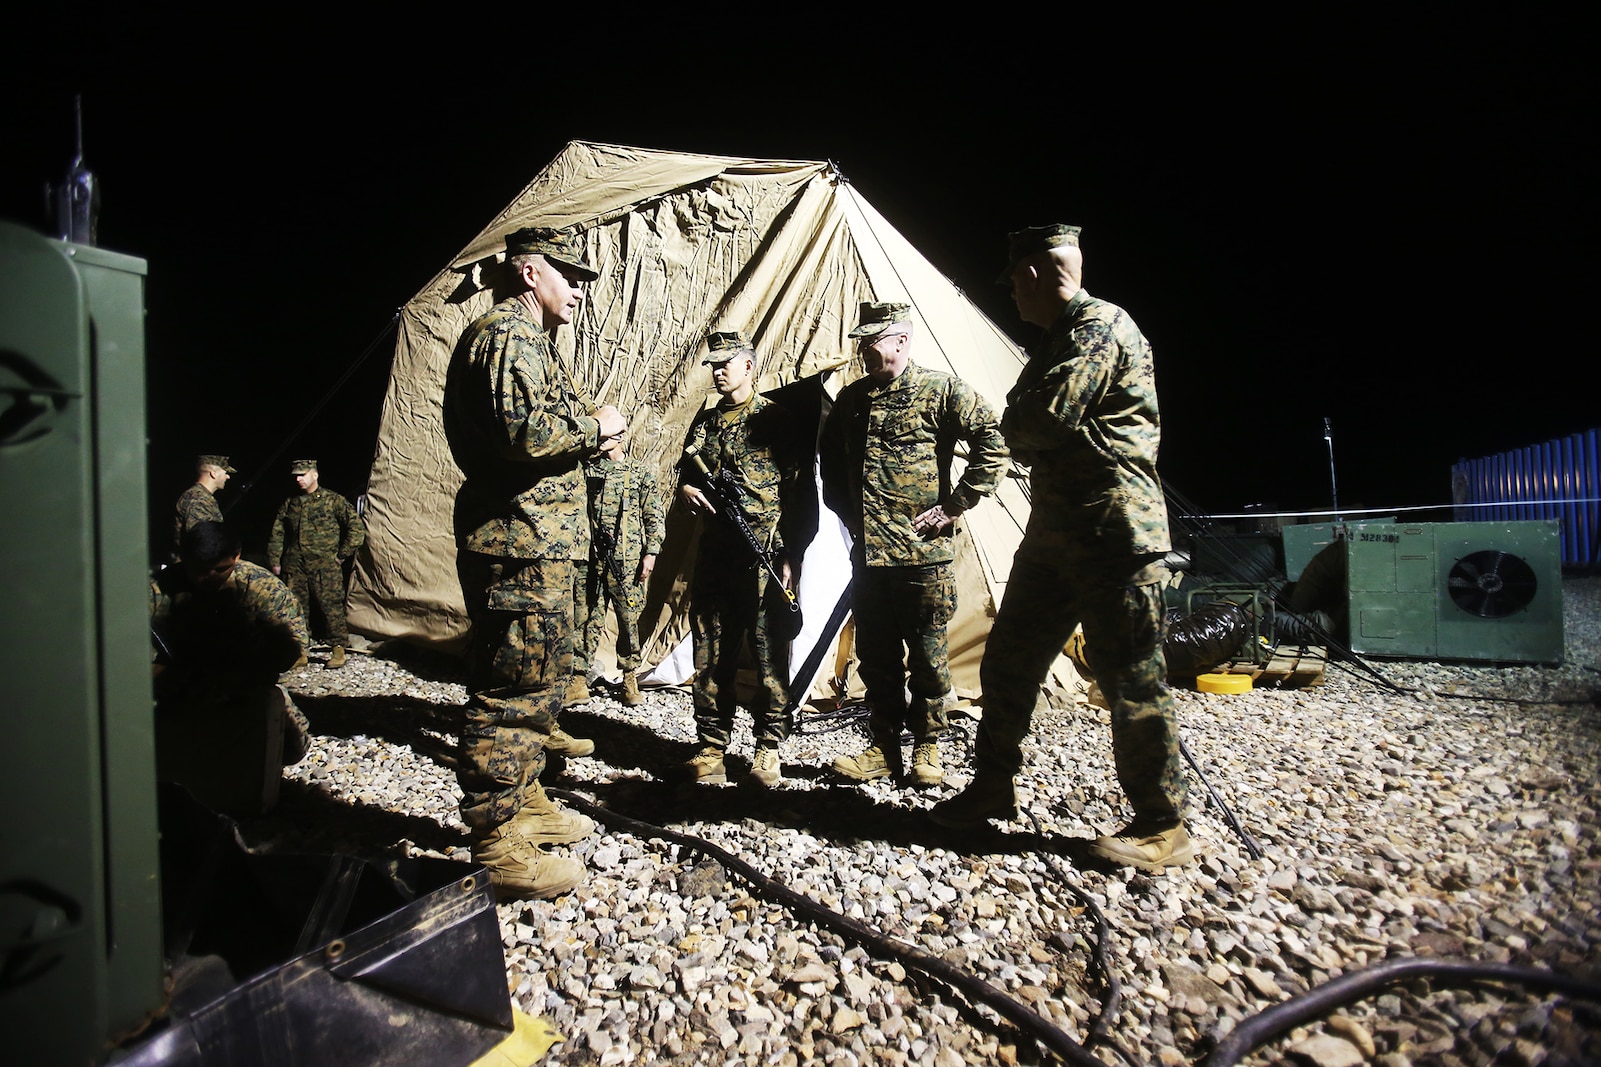 U.S. Marines Lt. Gen. David H. Berger and Sgt. Maj. Bradley Kasal learn about water purification during a cold weather training exercise at the Mountain Warfare Training Center in Bridgeport, Calif., March 17, 2016. Berger is the commanding general and Kasal is the sergeant major of I Marine Expeditionary Force. Approximately 90 Marines with 7th Engineer Support Battalion, 1st Marine Logistics Group, served as the logistics combat element in support of 2nd Battalion, 4th Marine Regiment, 1st Marine Division, during Mountain Exercise 6-16, Feb. 24- March 26, 2016. (U.S. Marine Corps photo by Sgt. Laura Gauna/released)